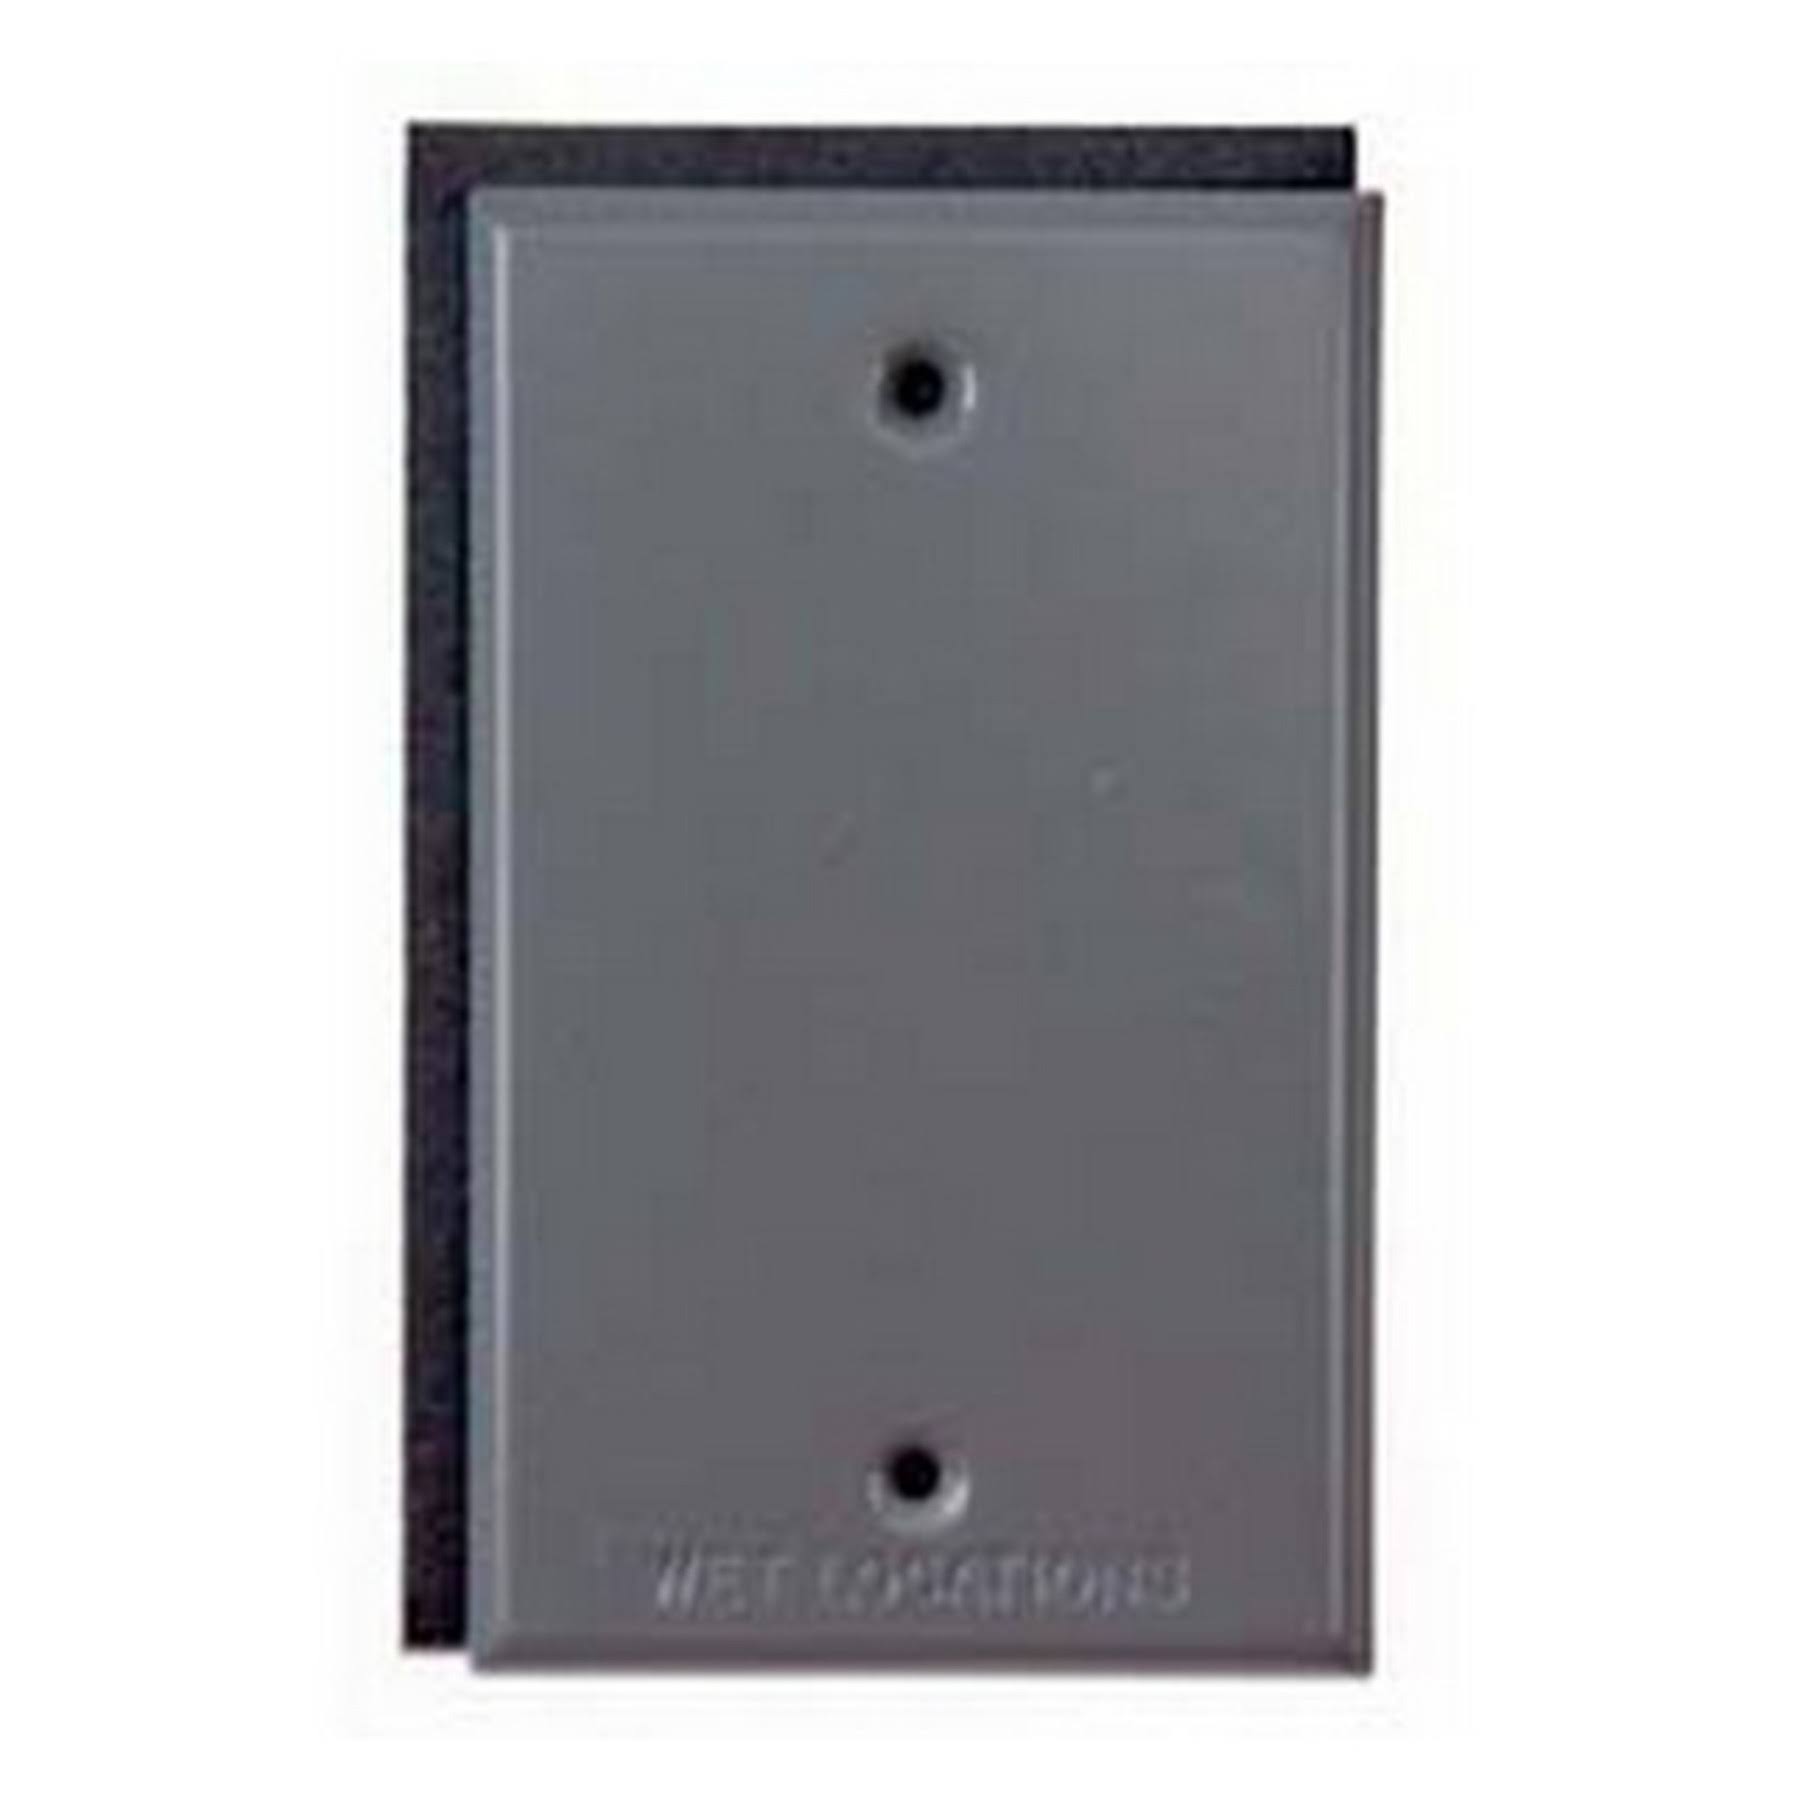 Hubbel Electric Raco Single Gang Blank Switch Plate Cover - Gray